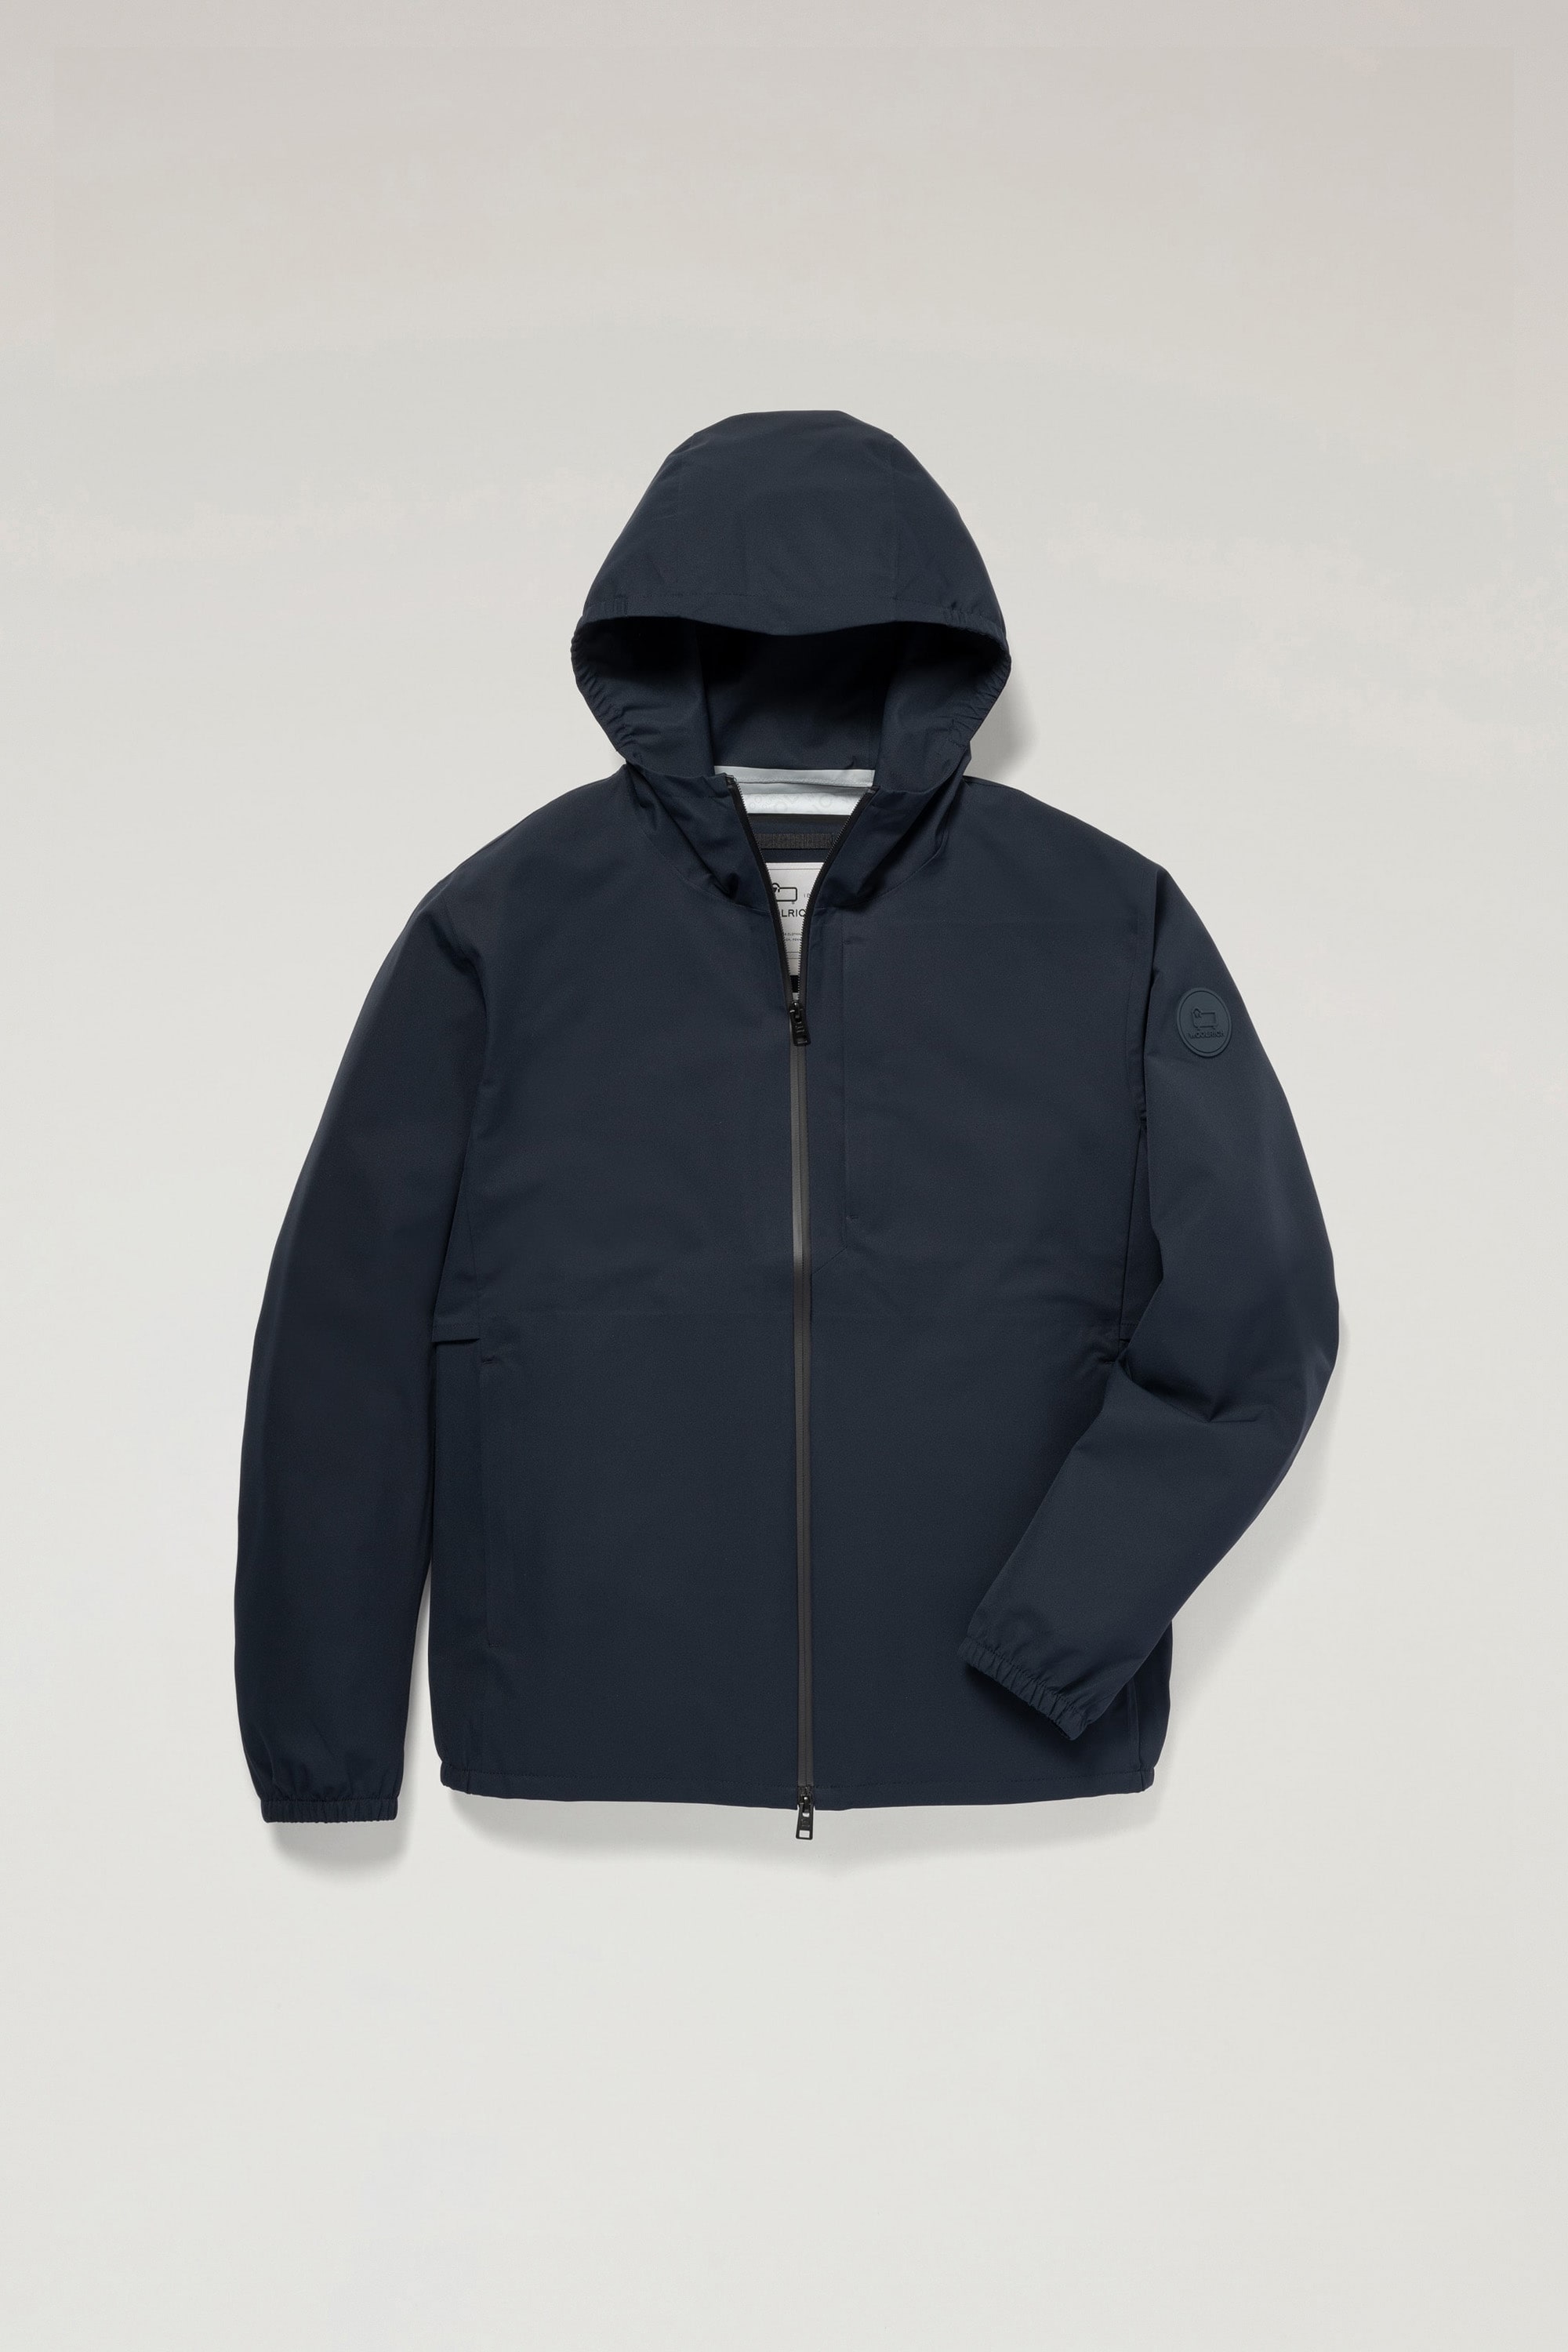 PACIFIC TWO LAYERS JACKET